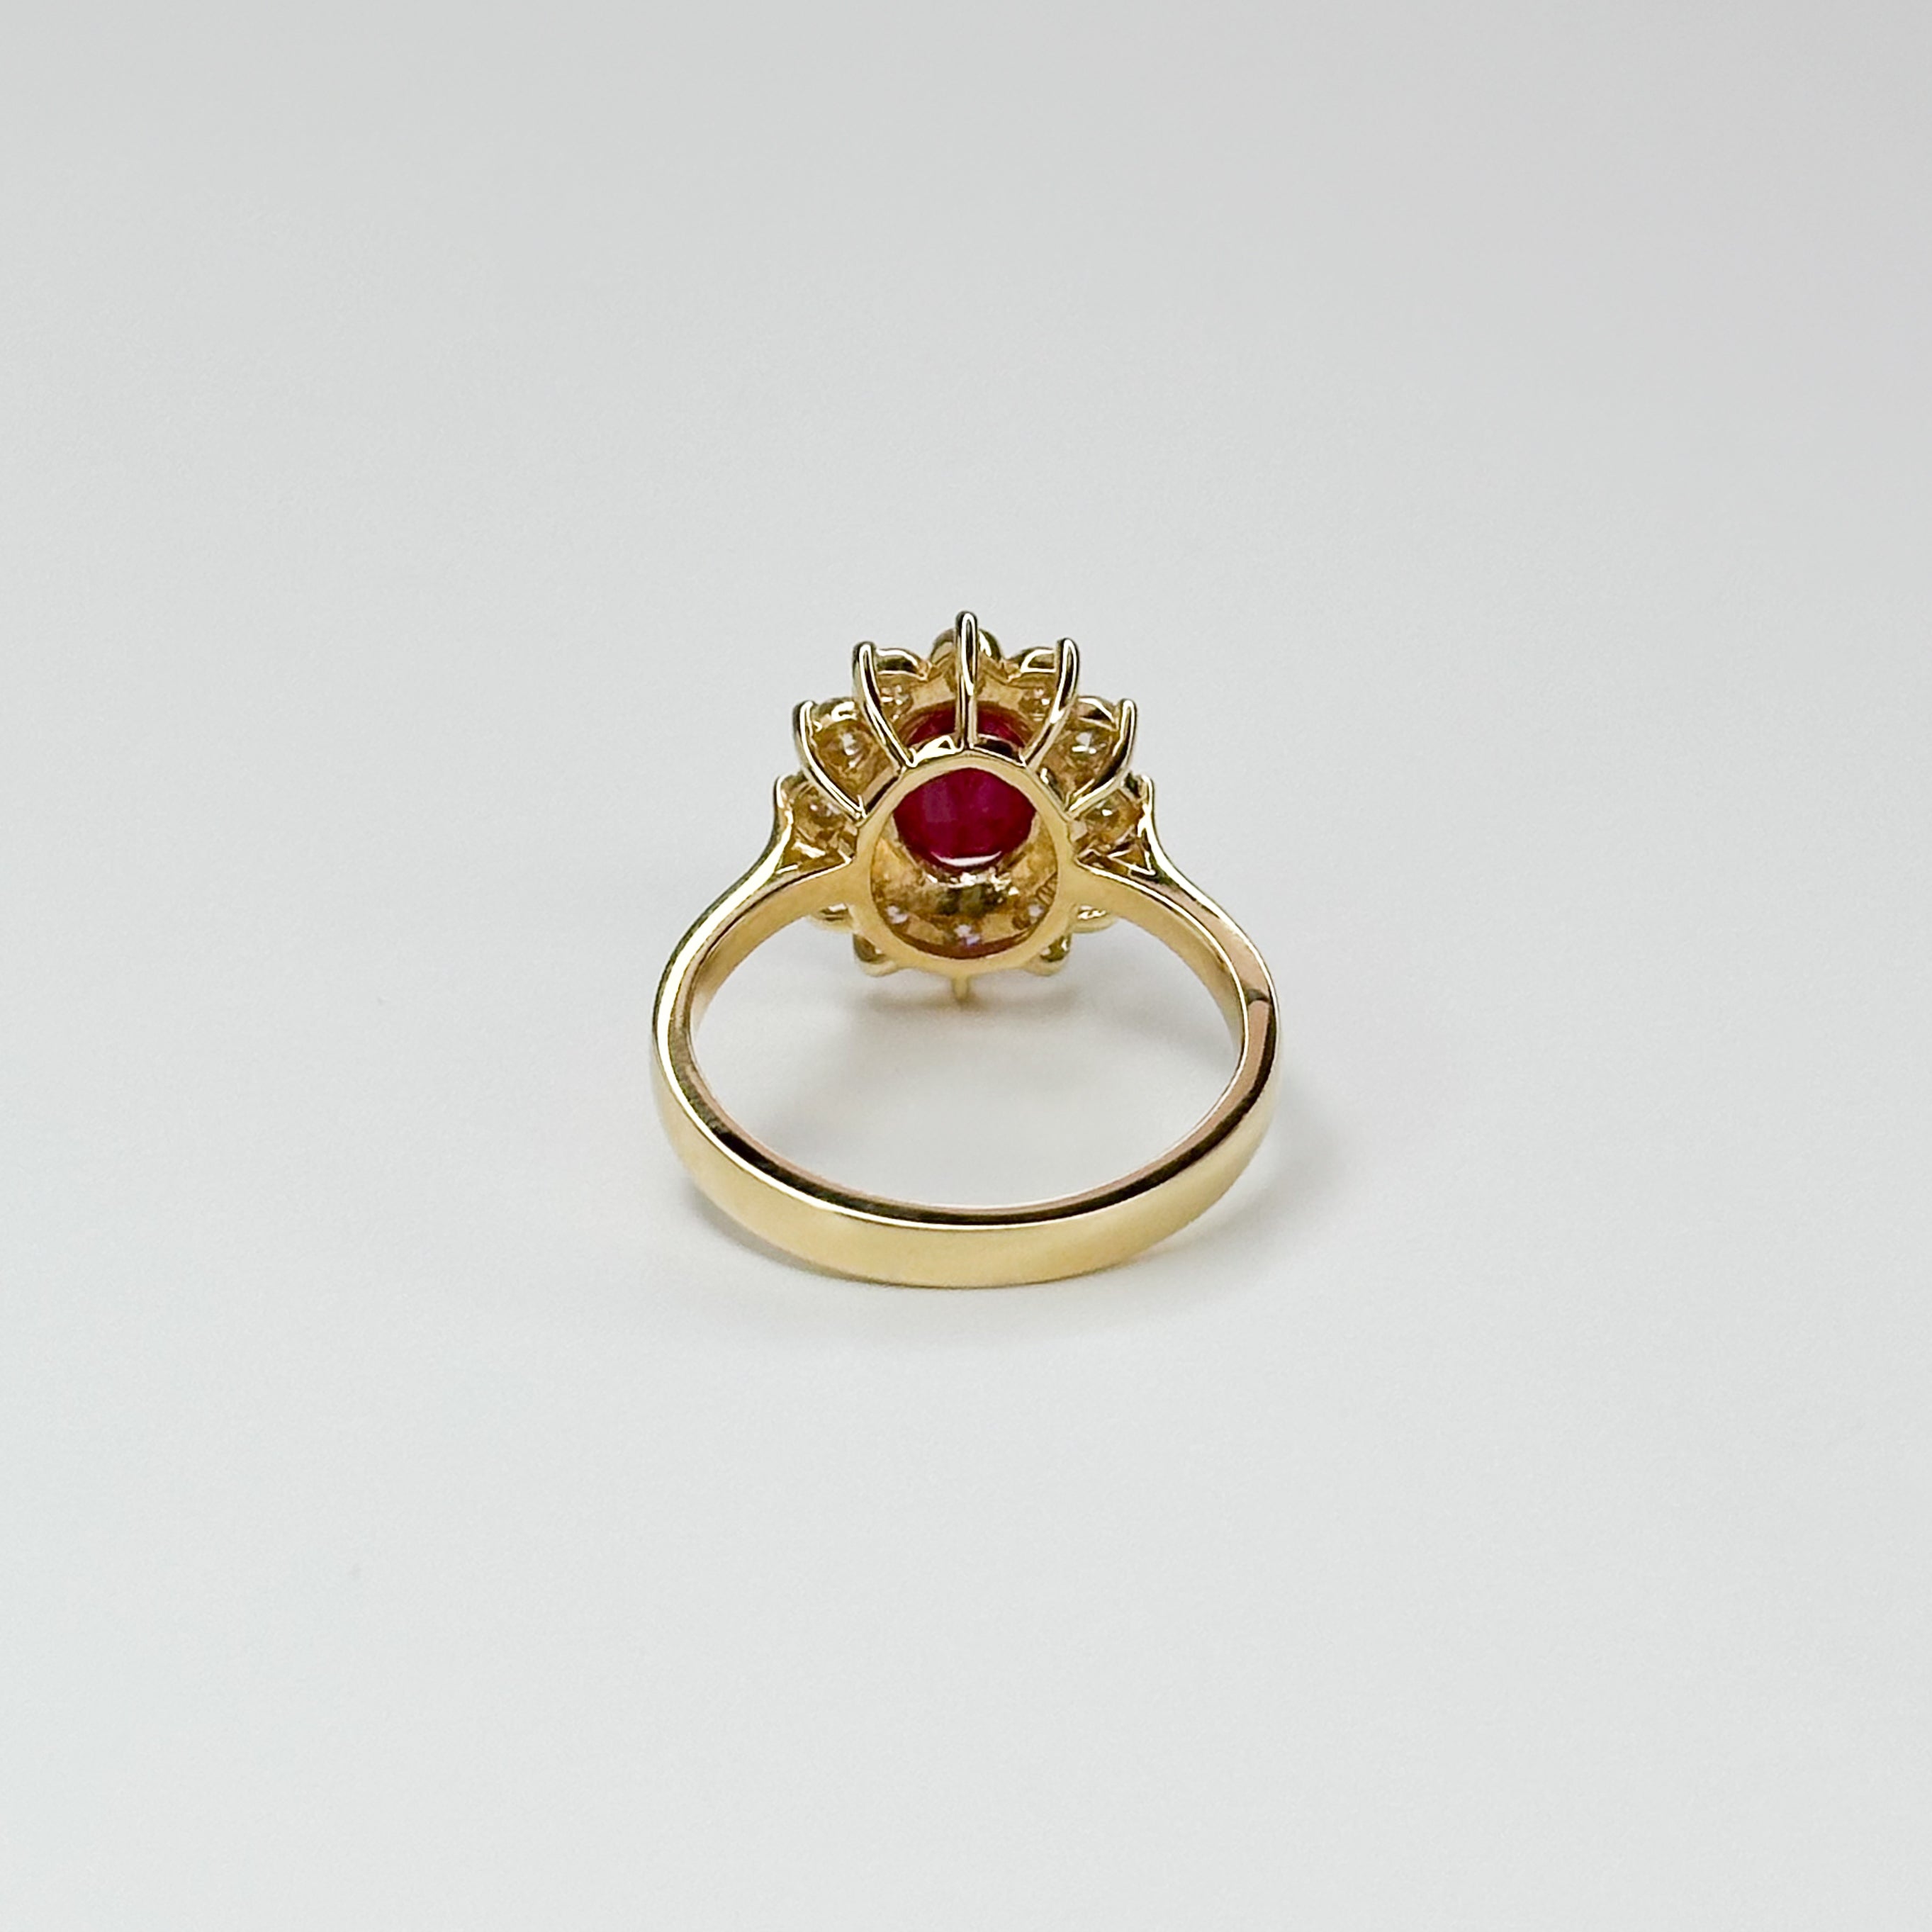 1.70ct Oval Cut Ruby Ring with Diamond Halo